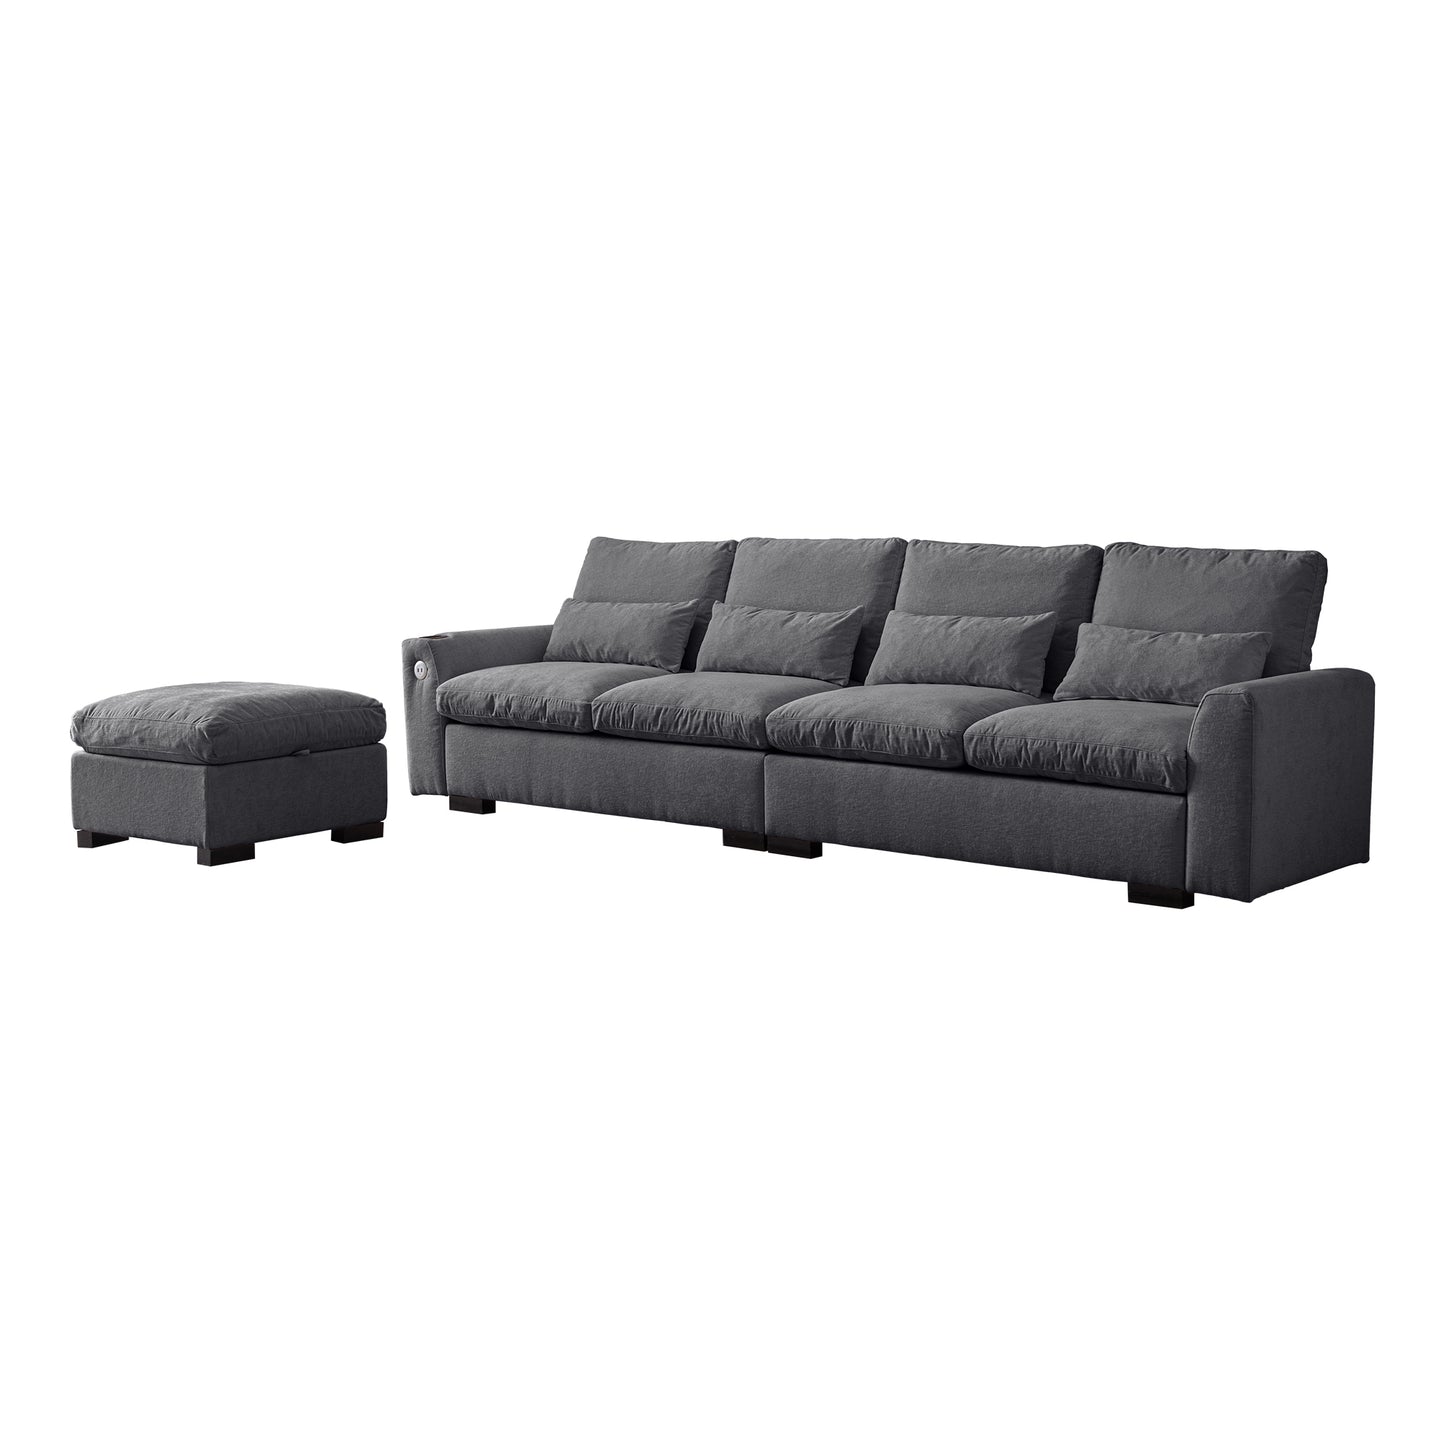 [VIDEO] provided]114.5"Modern Modular L Shaped Chenille Sofa Couch Reversible Ottoman With Storage Removable and Washable Cushions Sofa With USB Ports & Cup Holder For Living Room